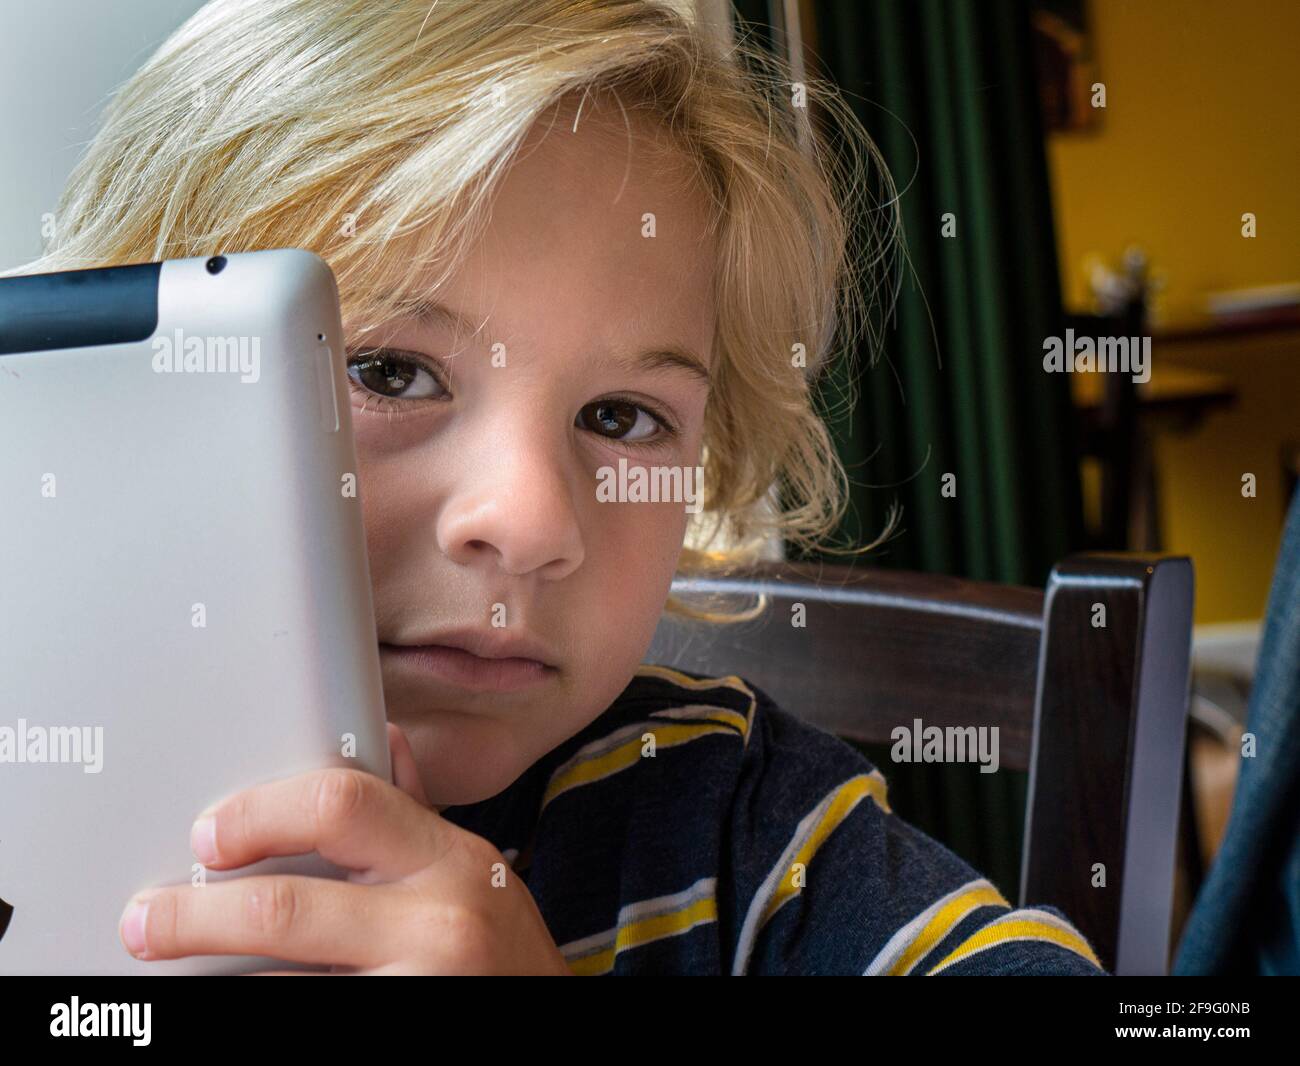 Infant blond boy 4-6 years peers innocently round his smart tablet iPad computer in home/school indoor learning situation Stock Photo